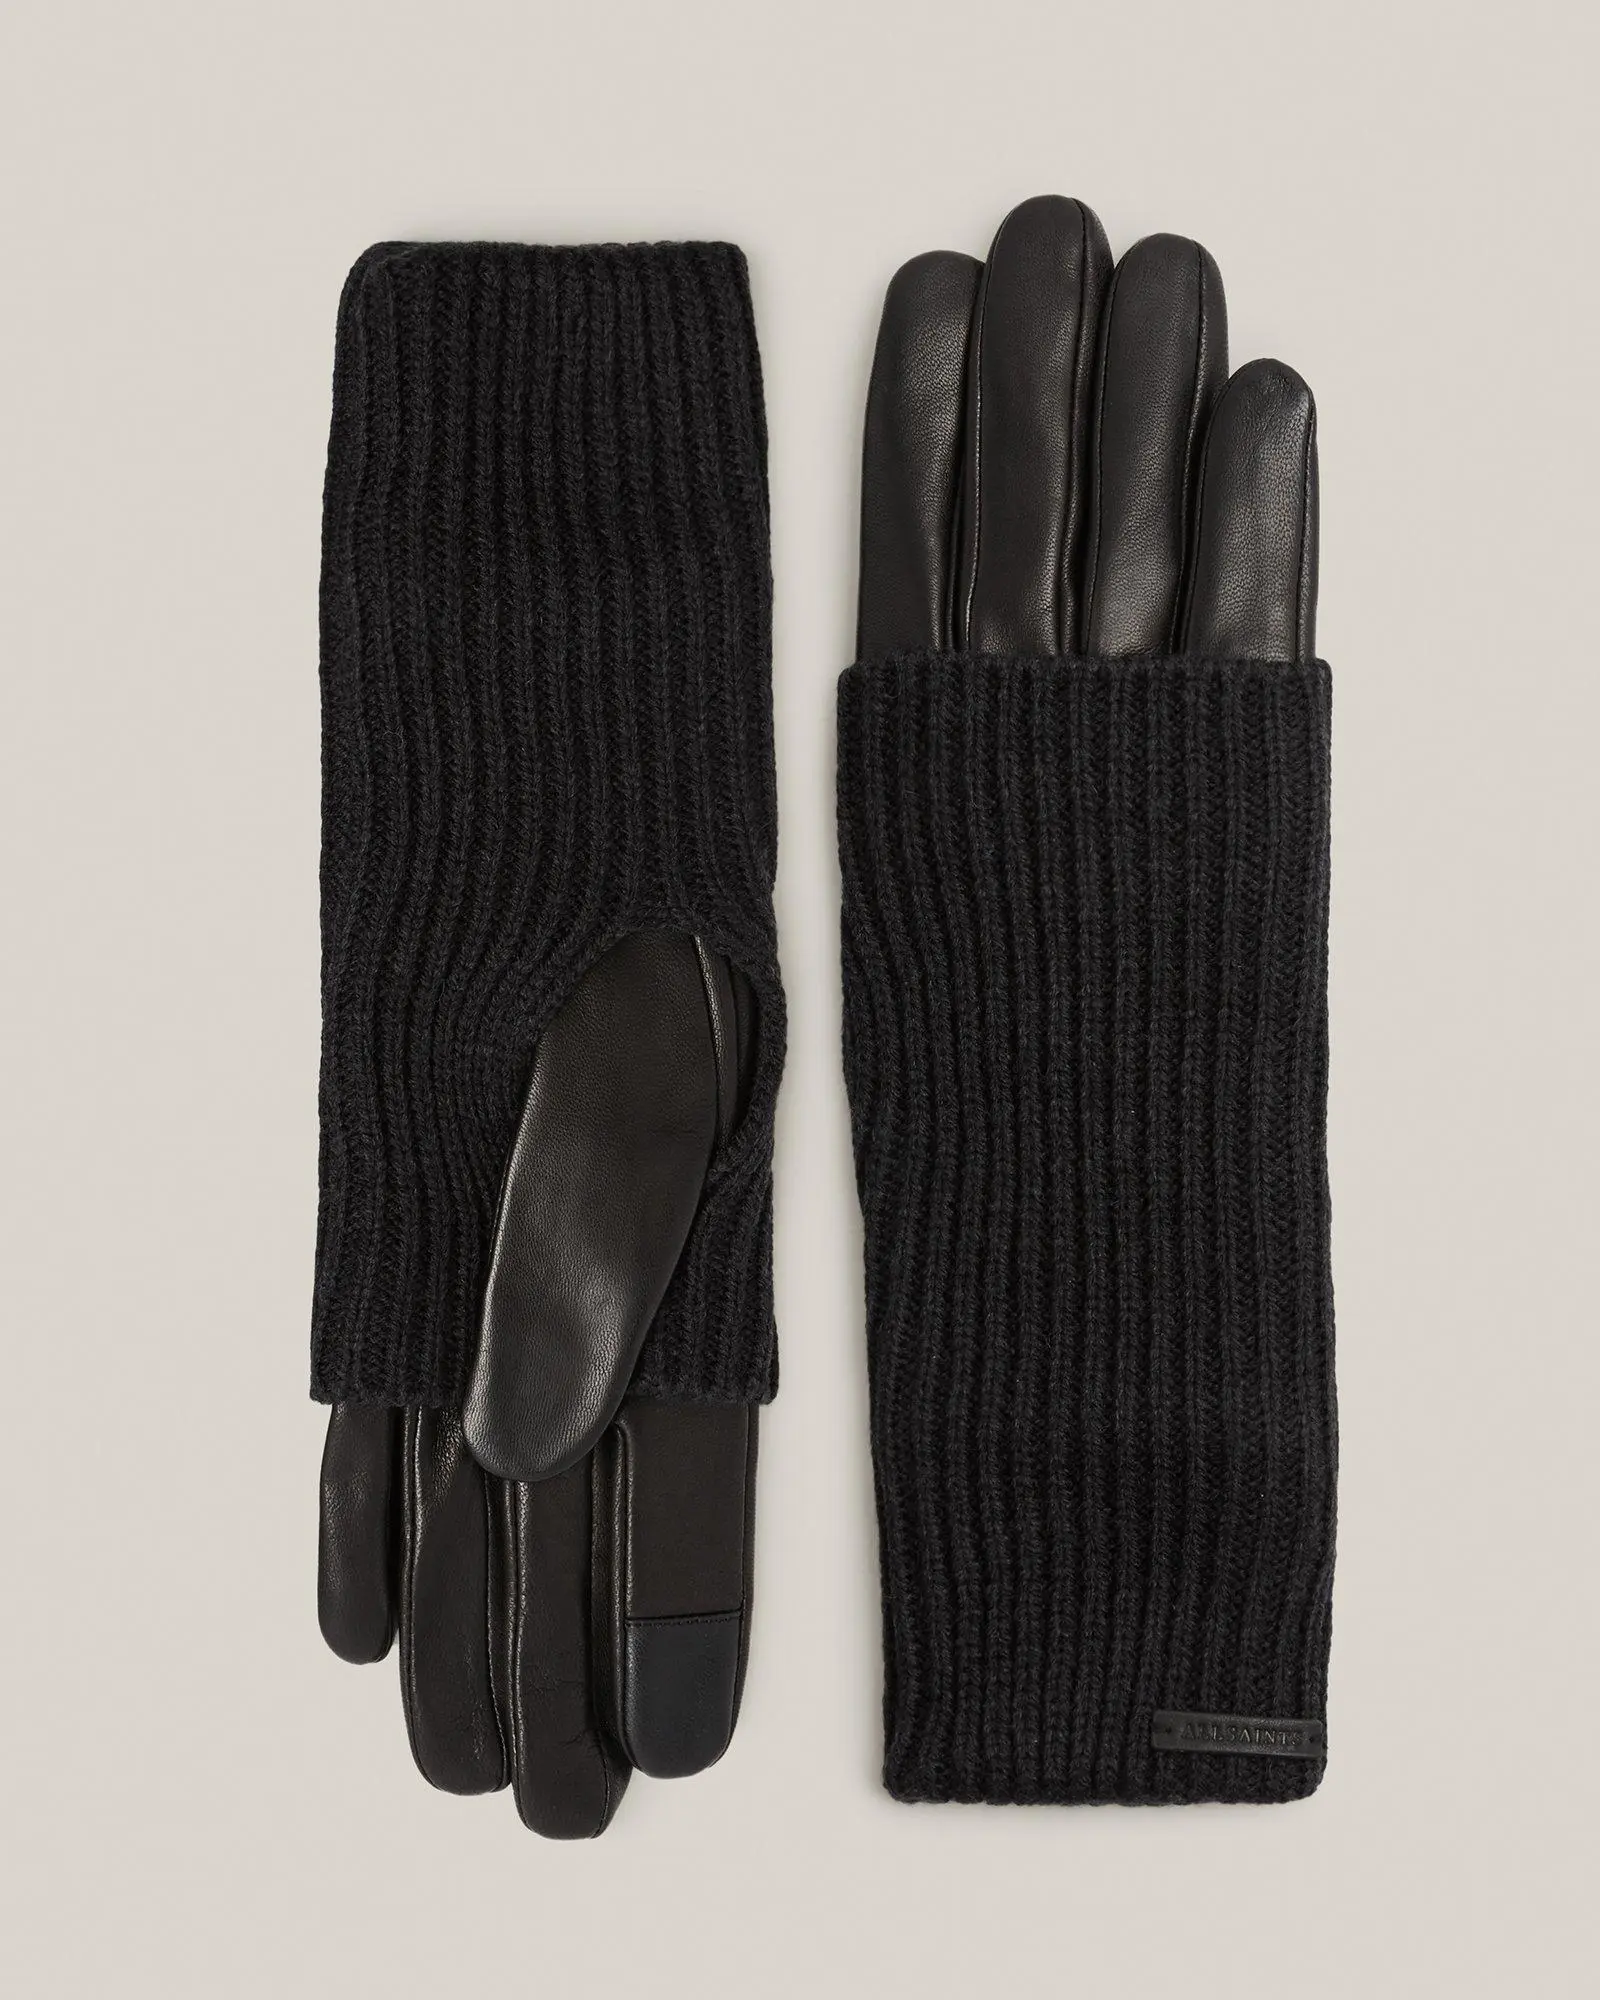 Parajumpers decorative-stitching shearling gloves - Grey